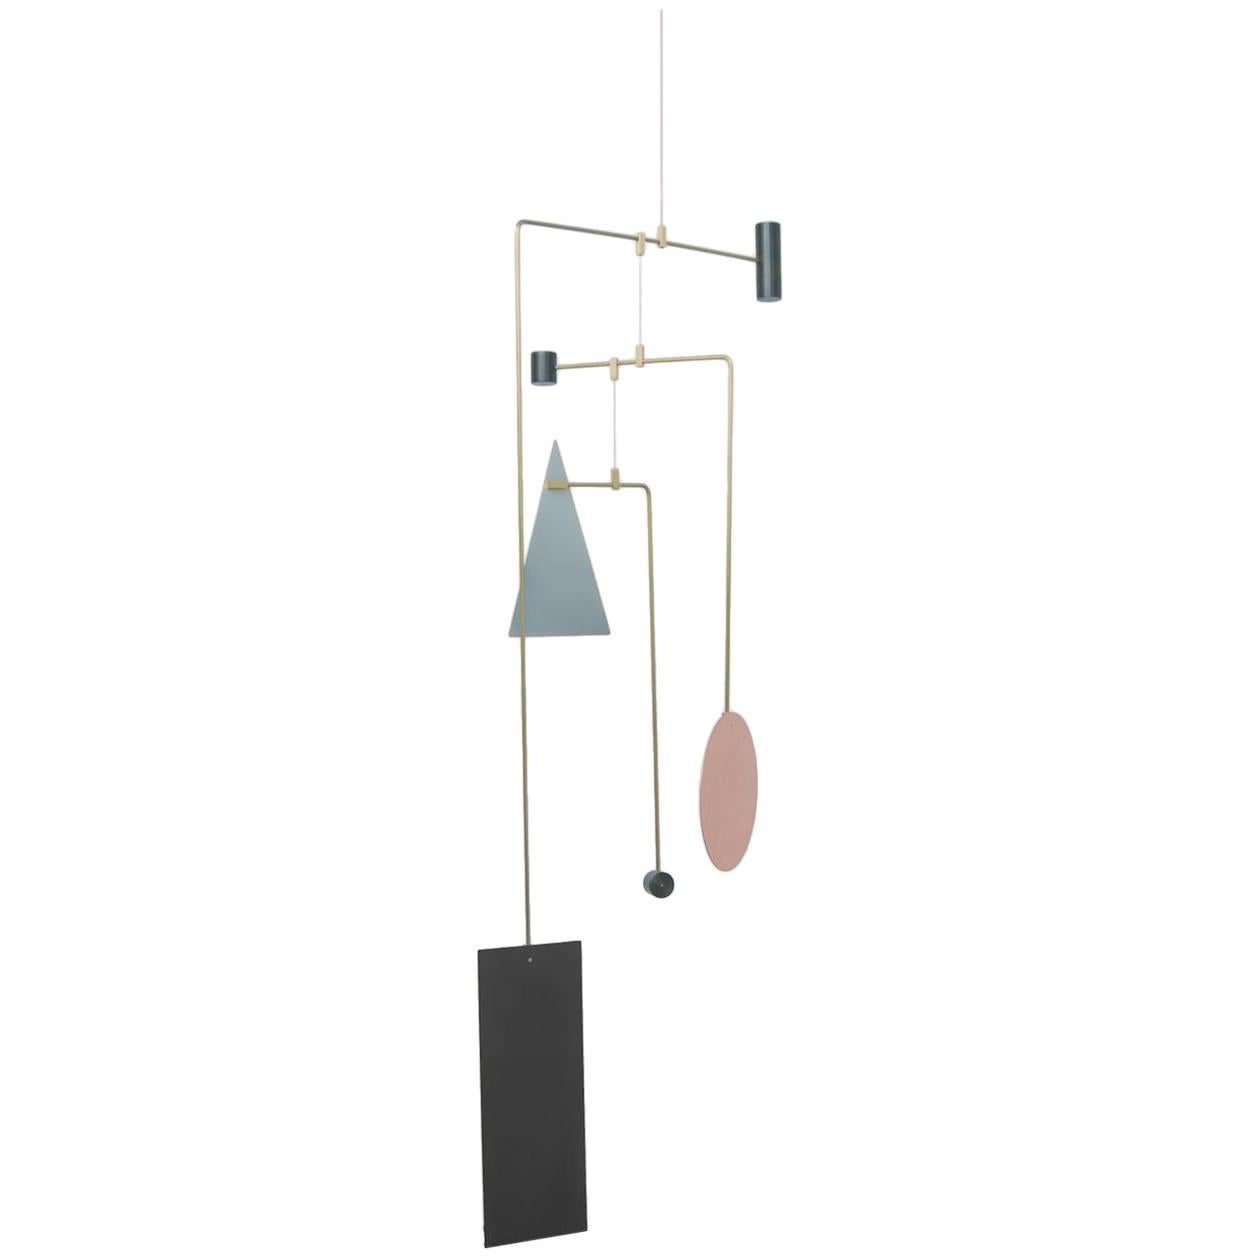 Sculptural Point Counterpoint Mobile A in Brass, Copper and Aluminum